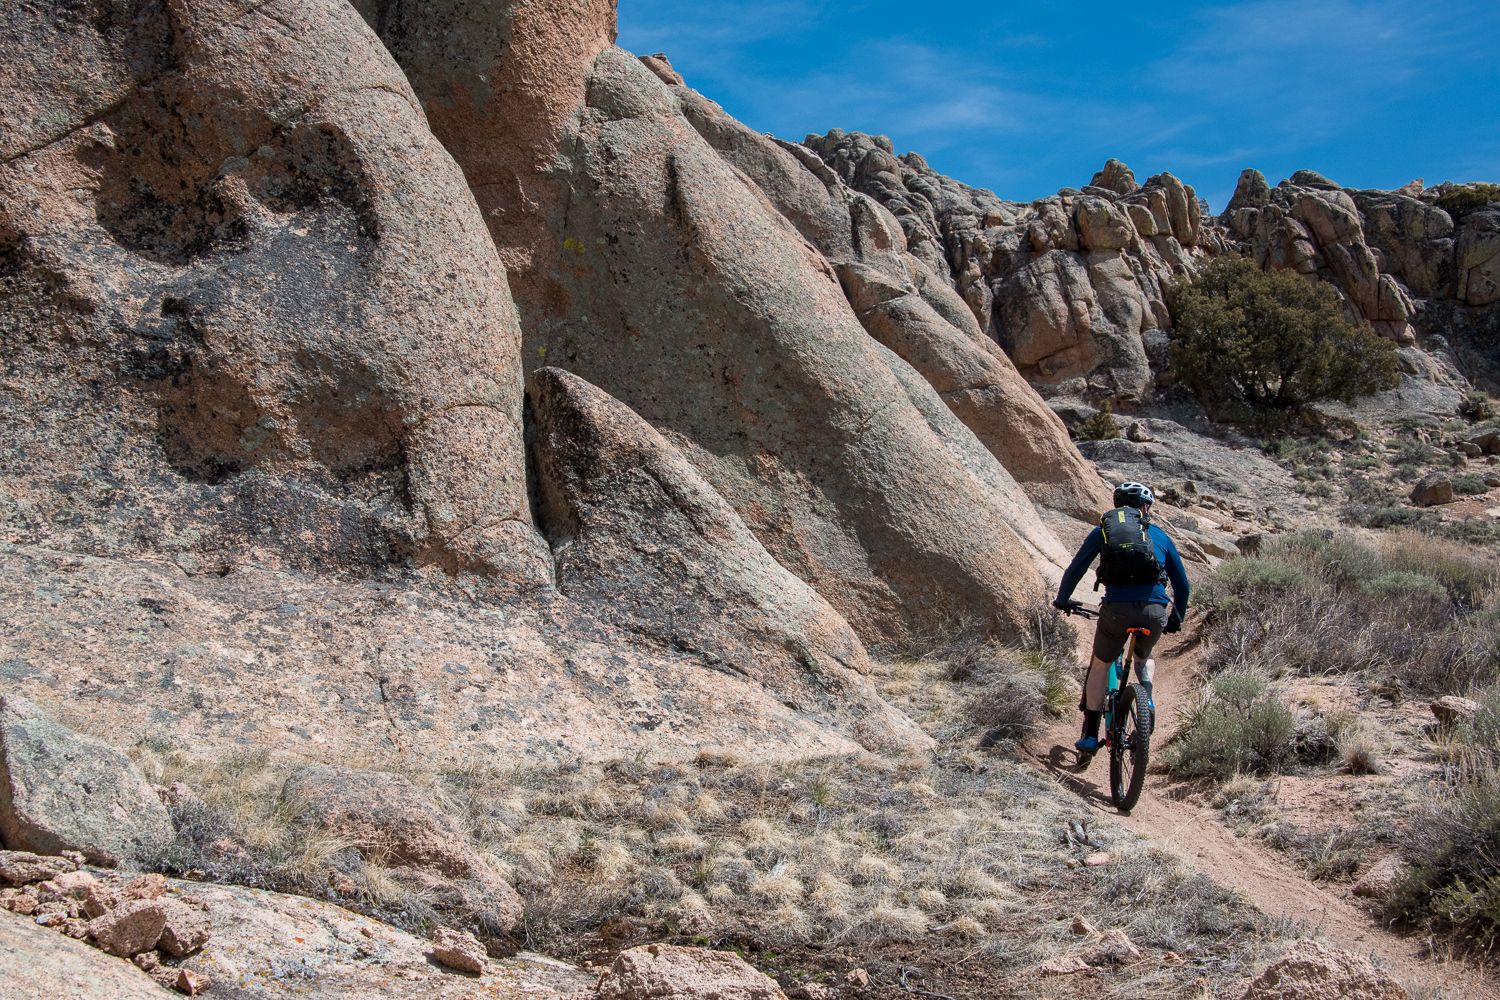 Visit Crested Butte and Gunnison this spring to ride Hartman Rocks